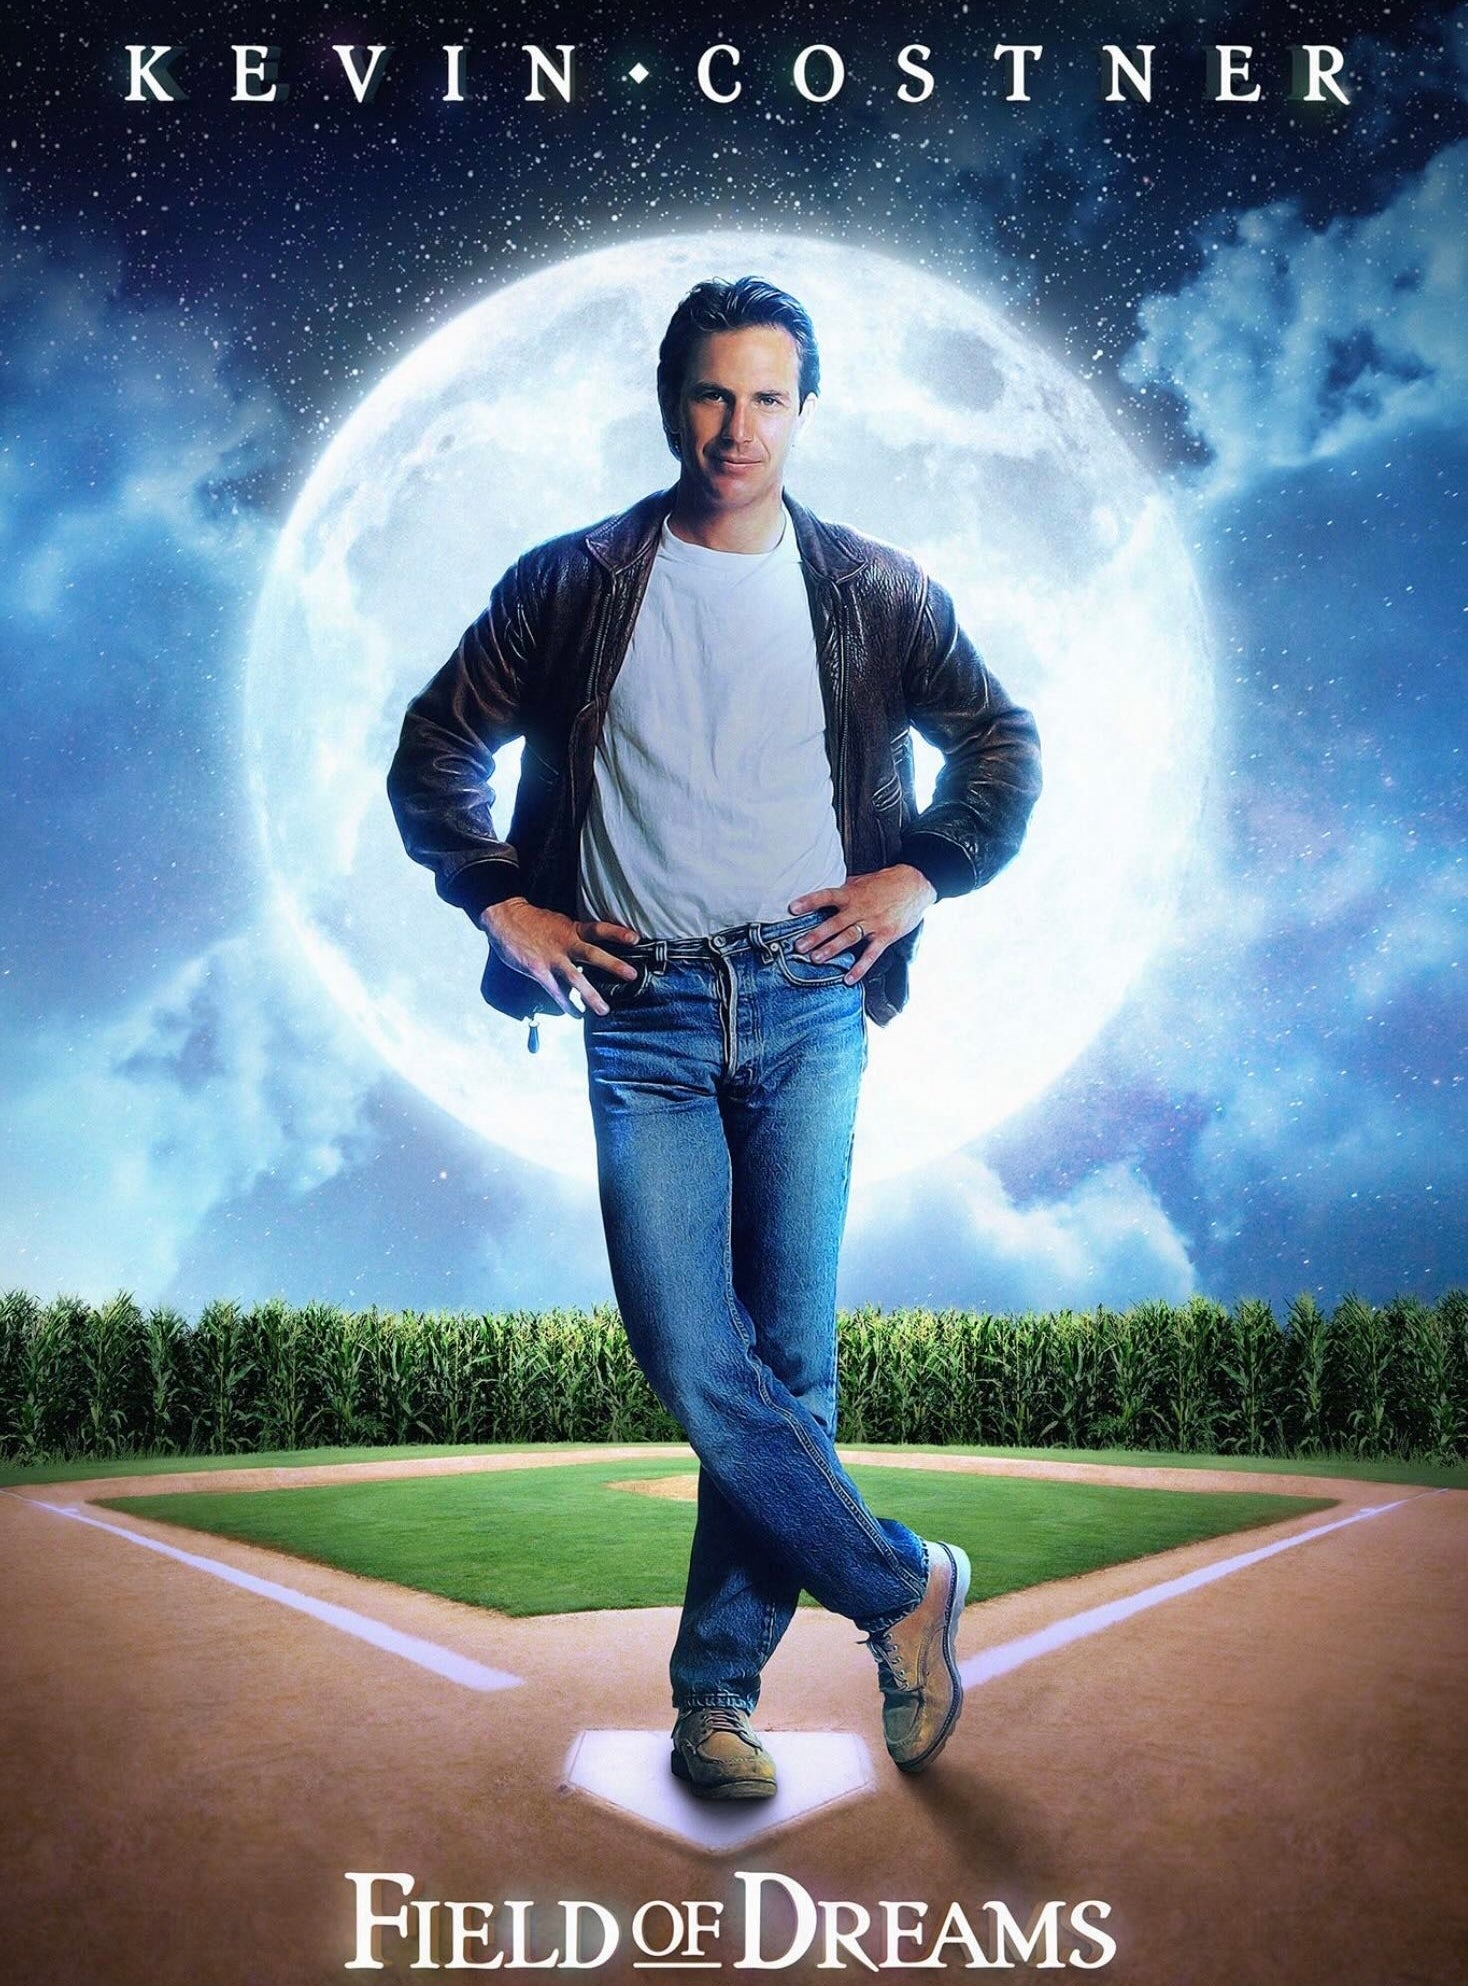 Kevin Costner stands on a baseball diamond with a moon backdrop for &quot;Field of Dreams&quot; film poster